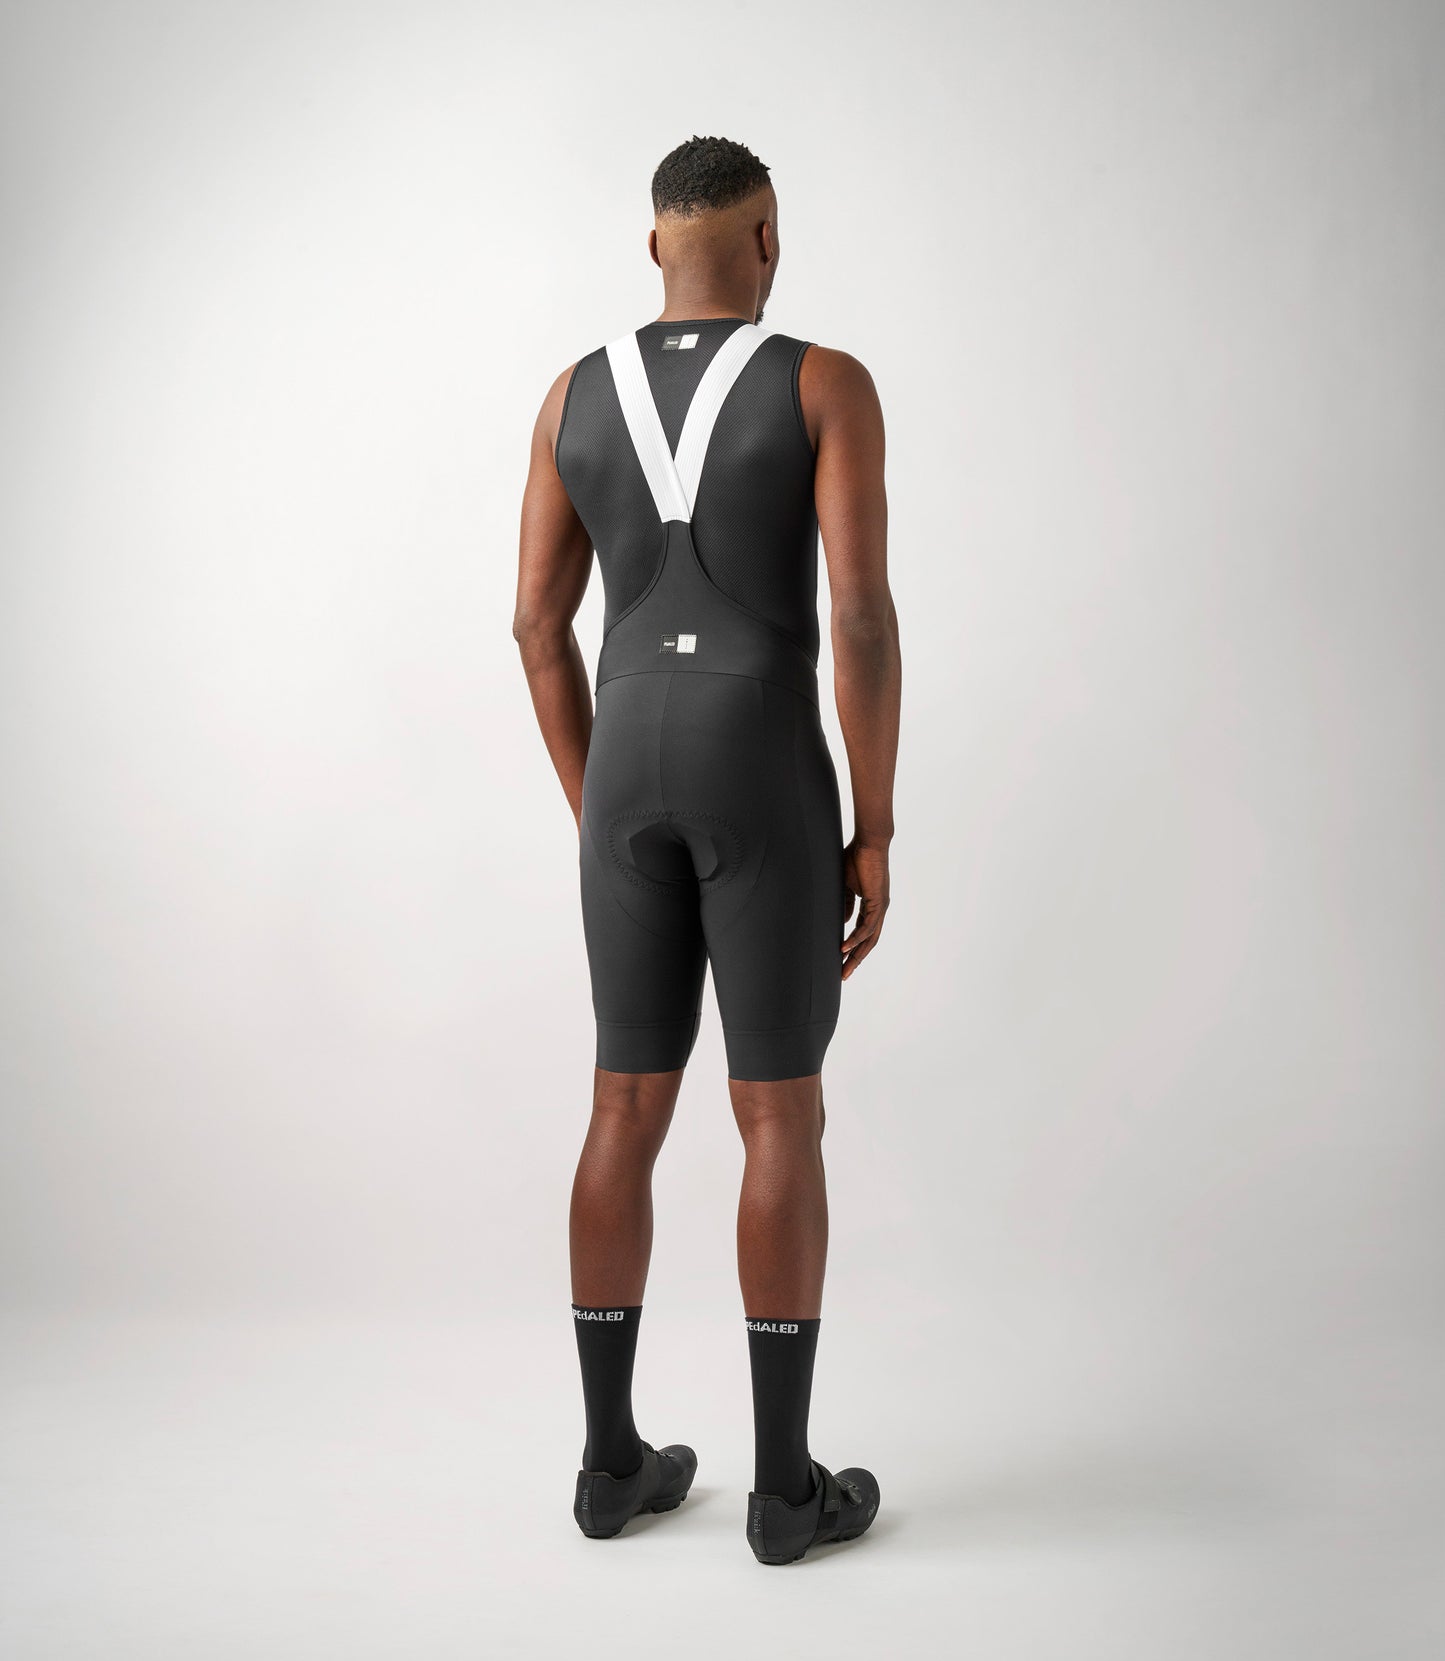 23SBBES00PE_4_men cycling bibshorts essential black total body back pedaled